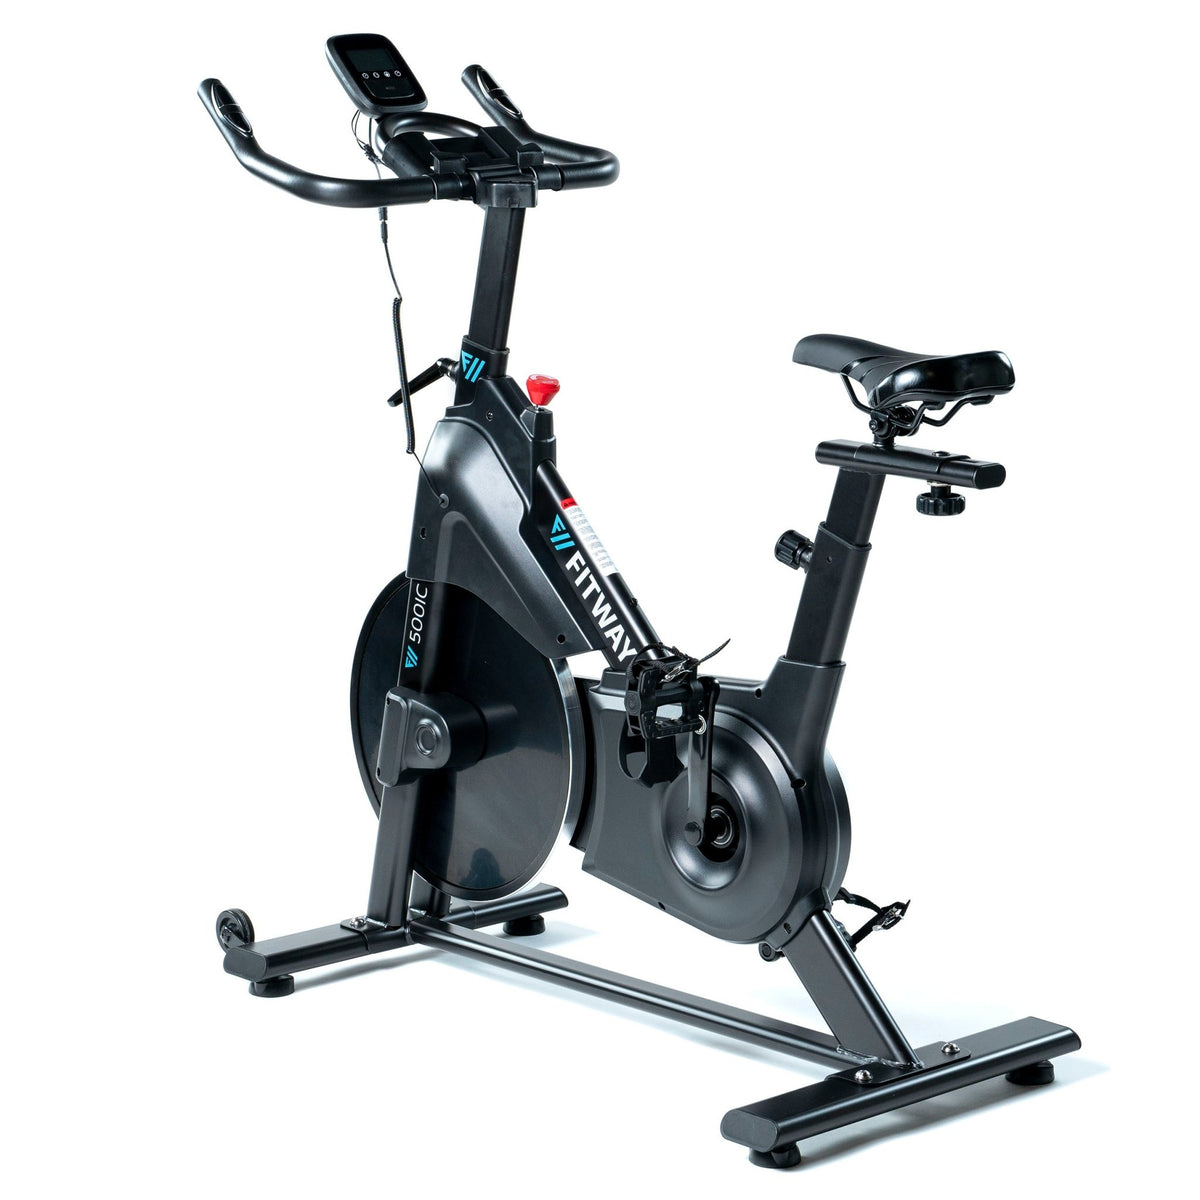 FitWay Equip. 500IC Indoor Cycle side view 